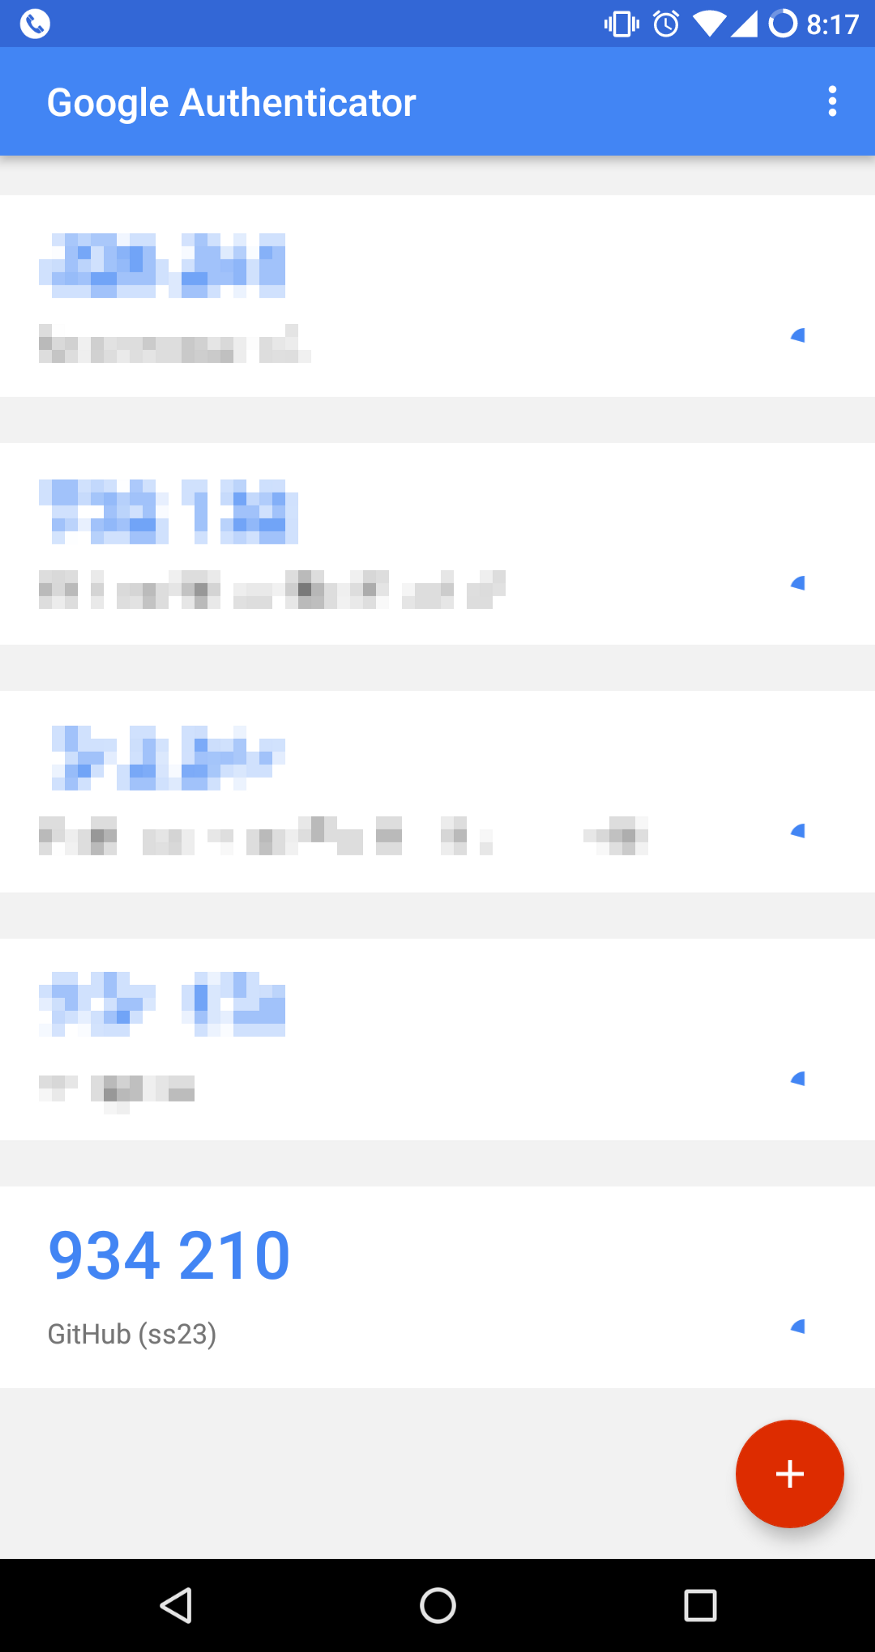 Screenshot of Google Authenticator showing a code of 934 210 for account named "GitHub (ss23)"